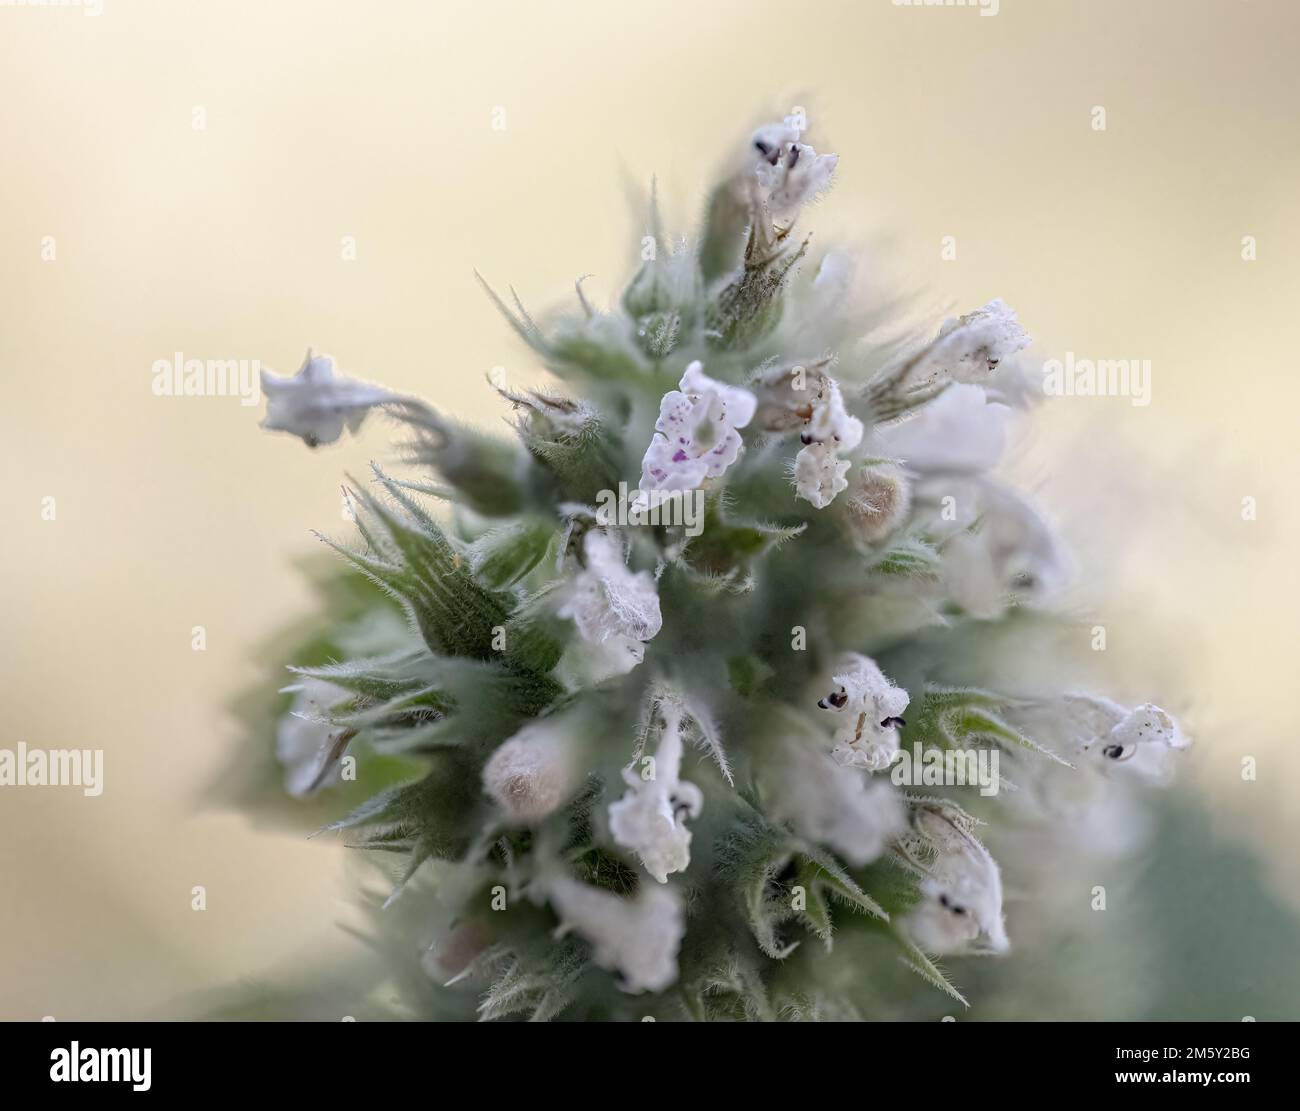 Catnip flowers up close with soft backgrounds. Stock Photo